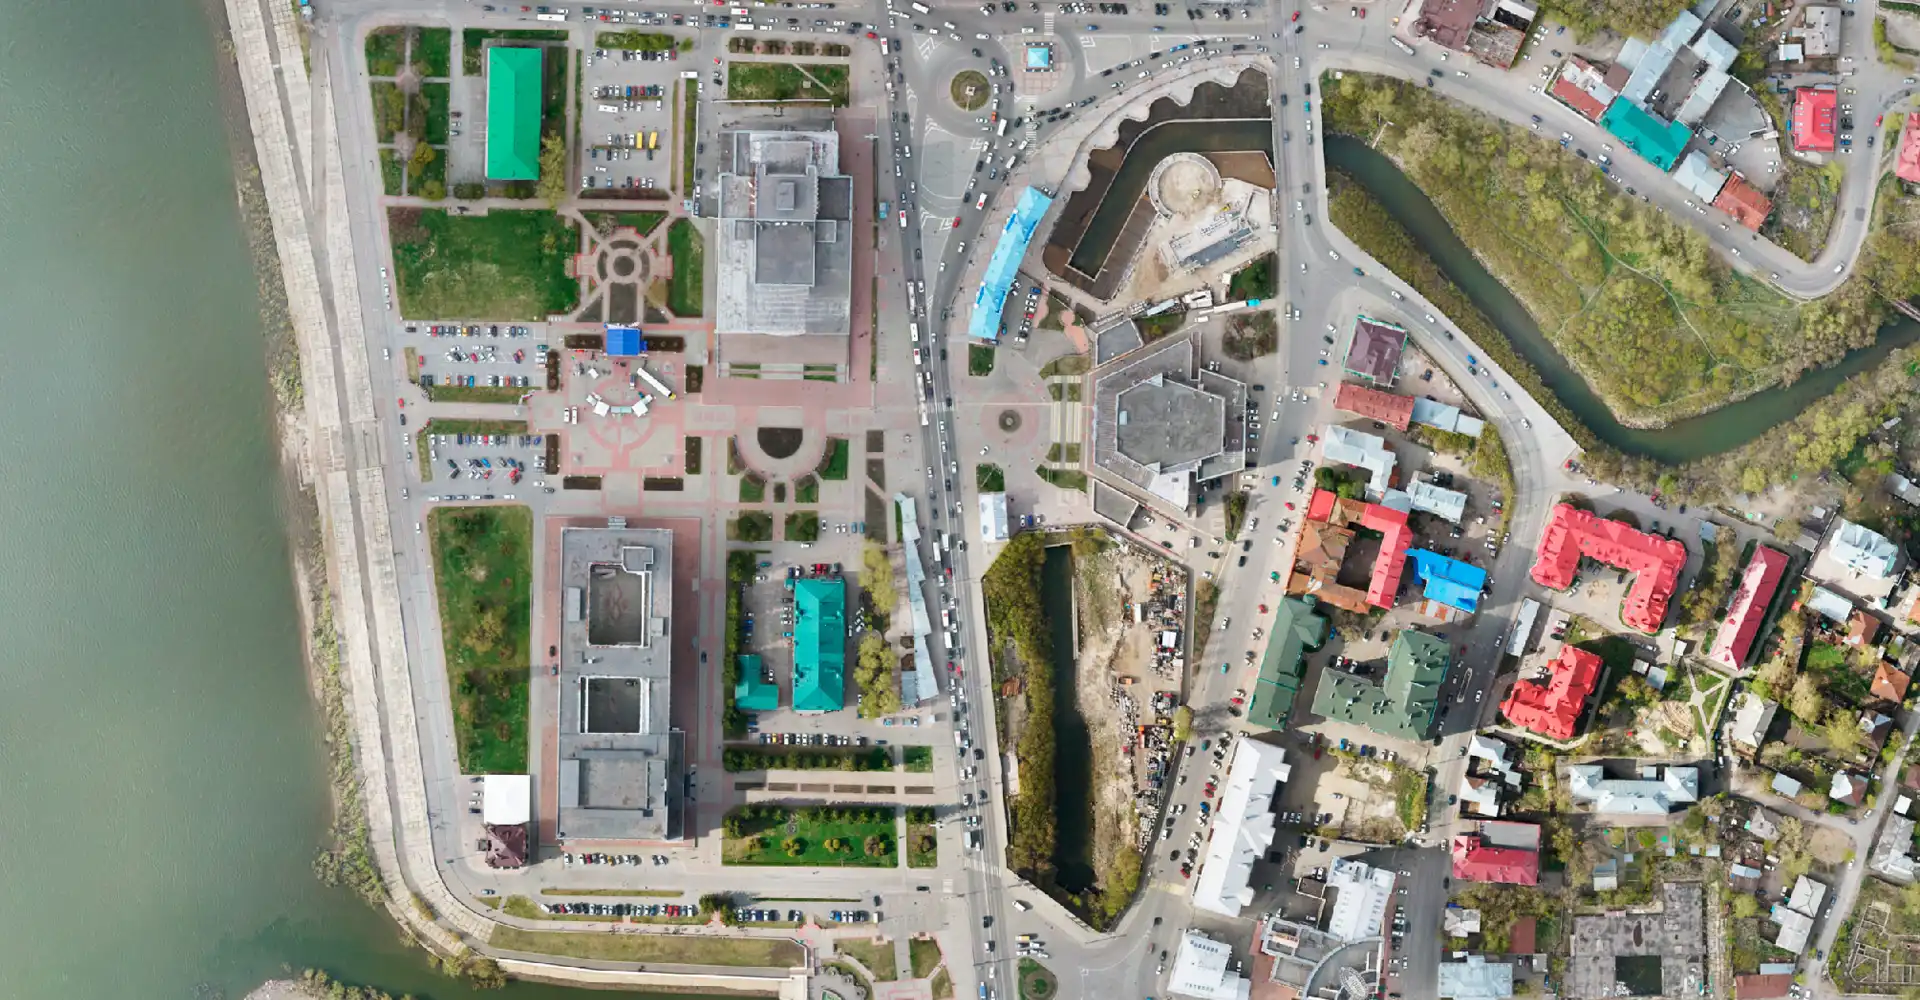 ZALA AERO specialists have created an orthophotomap and 3D model of the city of Tomsk